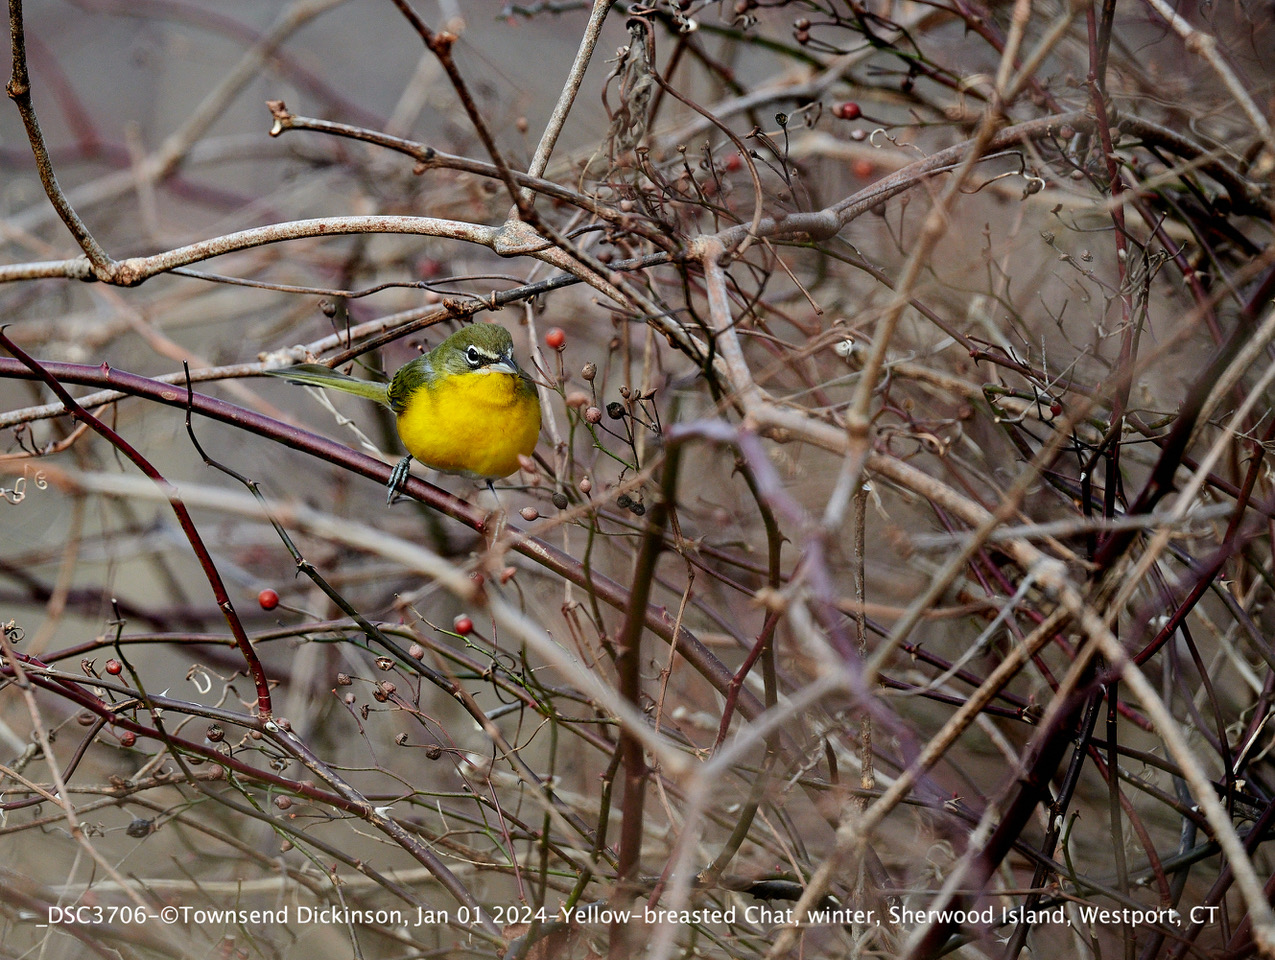 Yellow-breasted Chat, winter, Sherwood Island State Park, Westport, CT Jan 1, 2024 ©Townsend P. Dickinson Lis# DSC3706. All Rights Reserved.